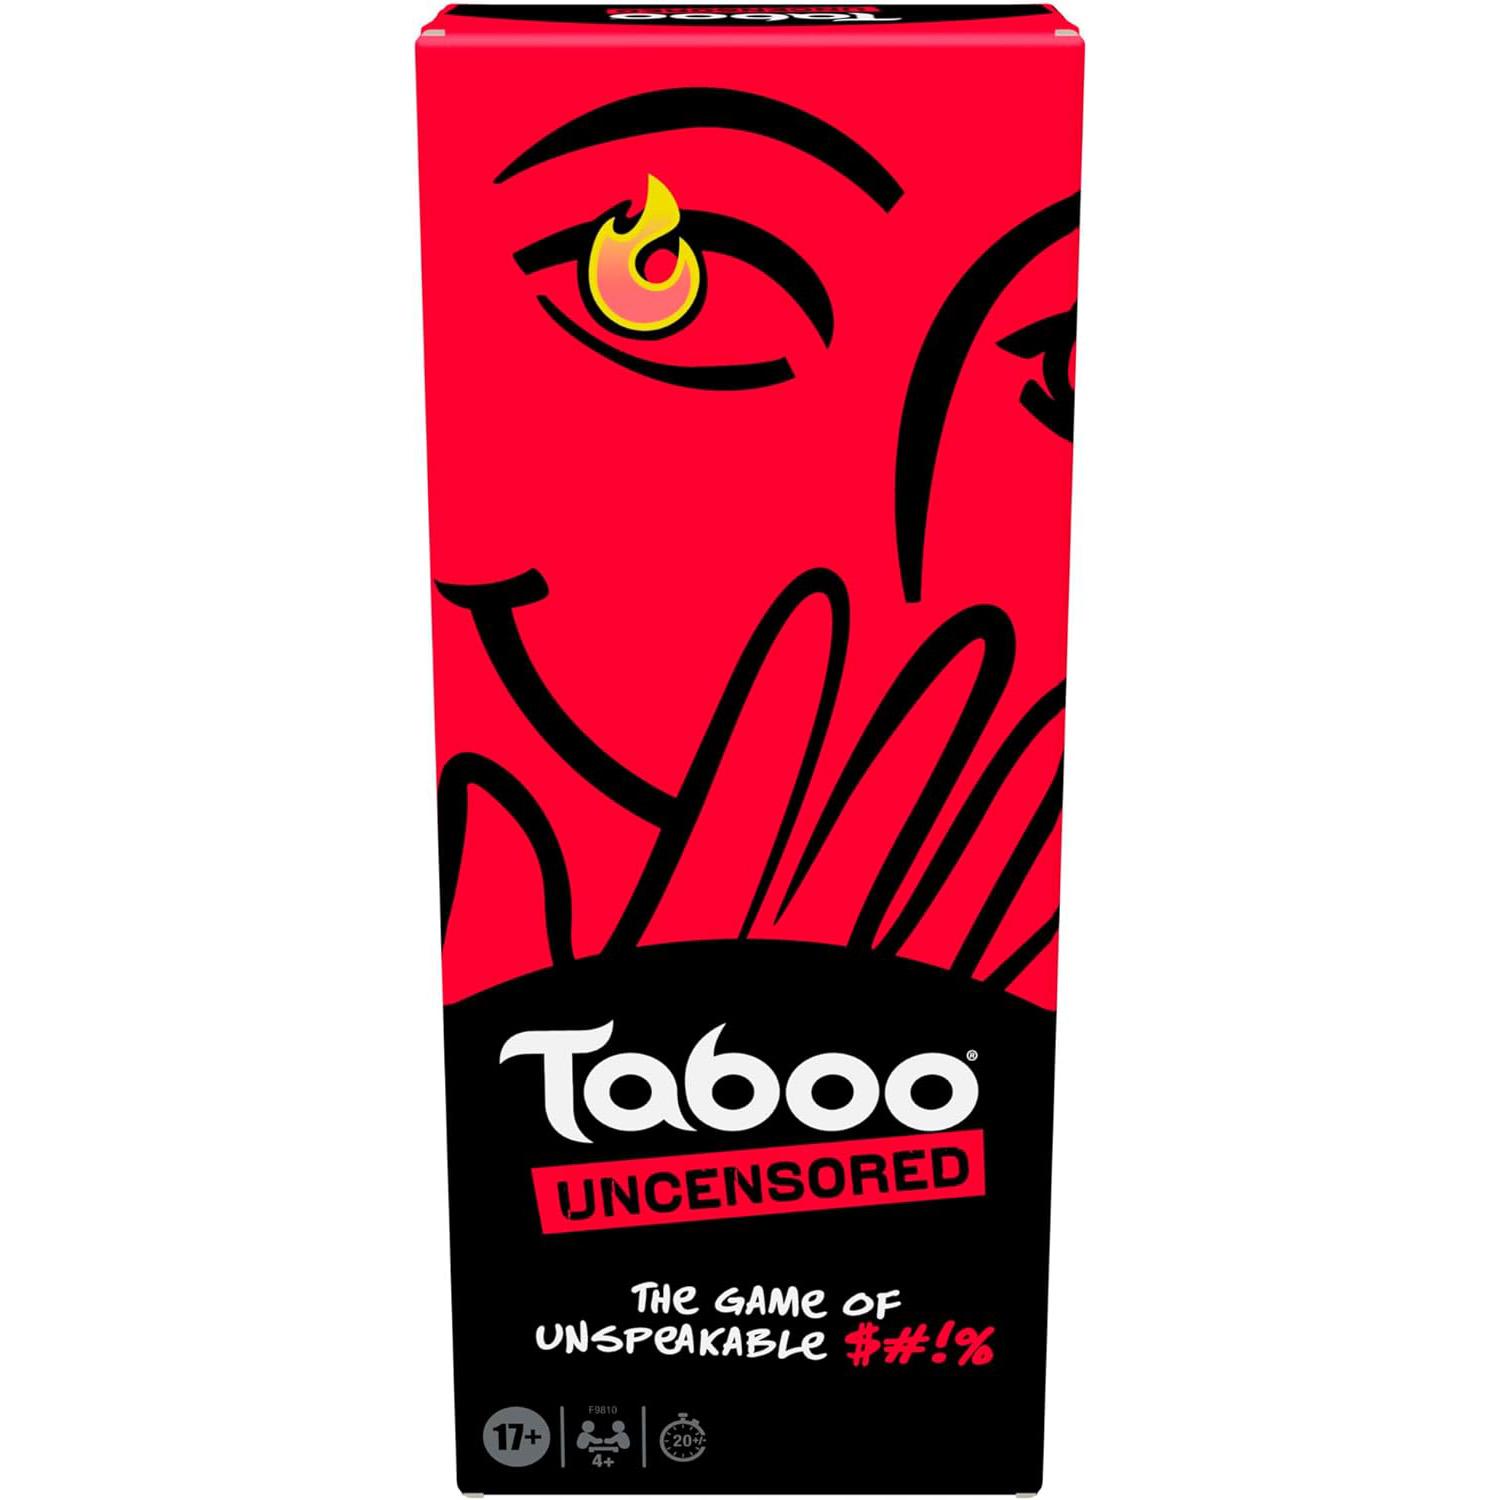 Hasbro Taboo Uncensored Party Game for $9.97